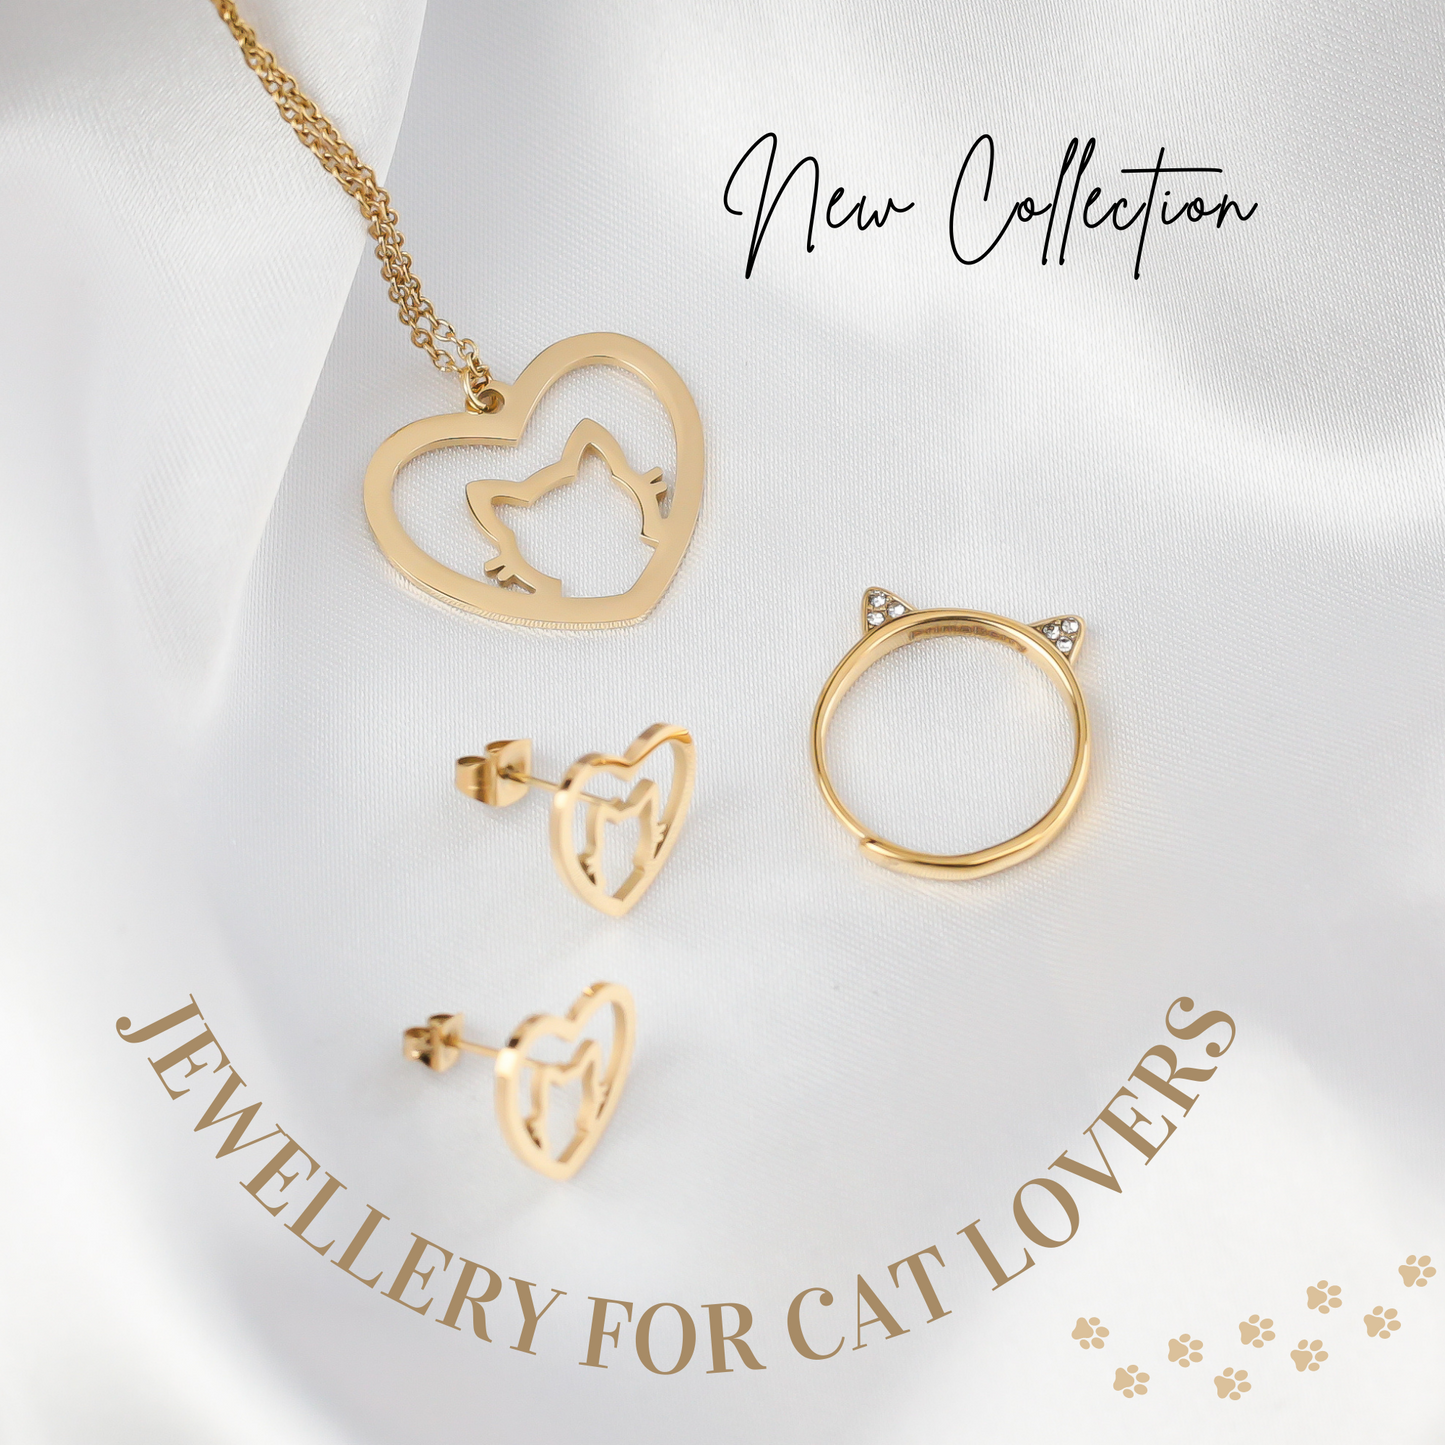 Cat Jewellery Set: A Cute and Unique Gift for Cat Lovers